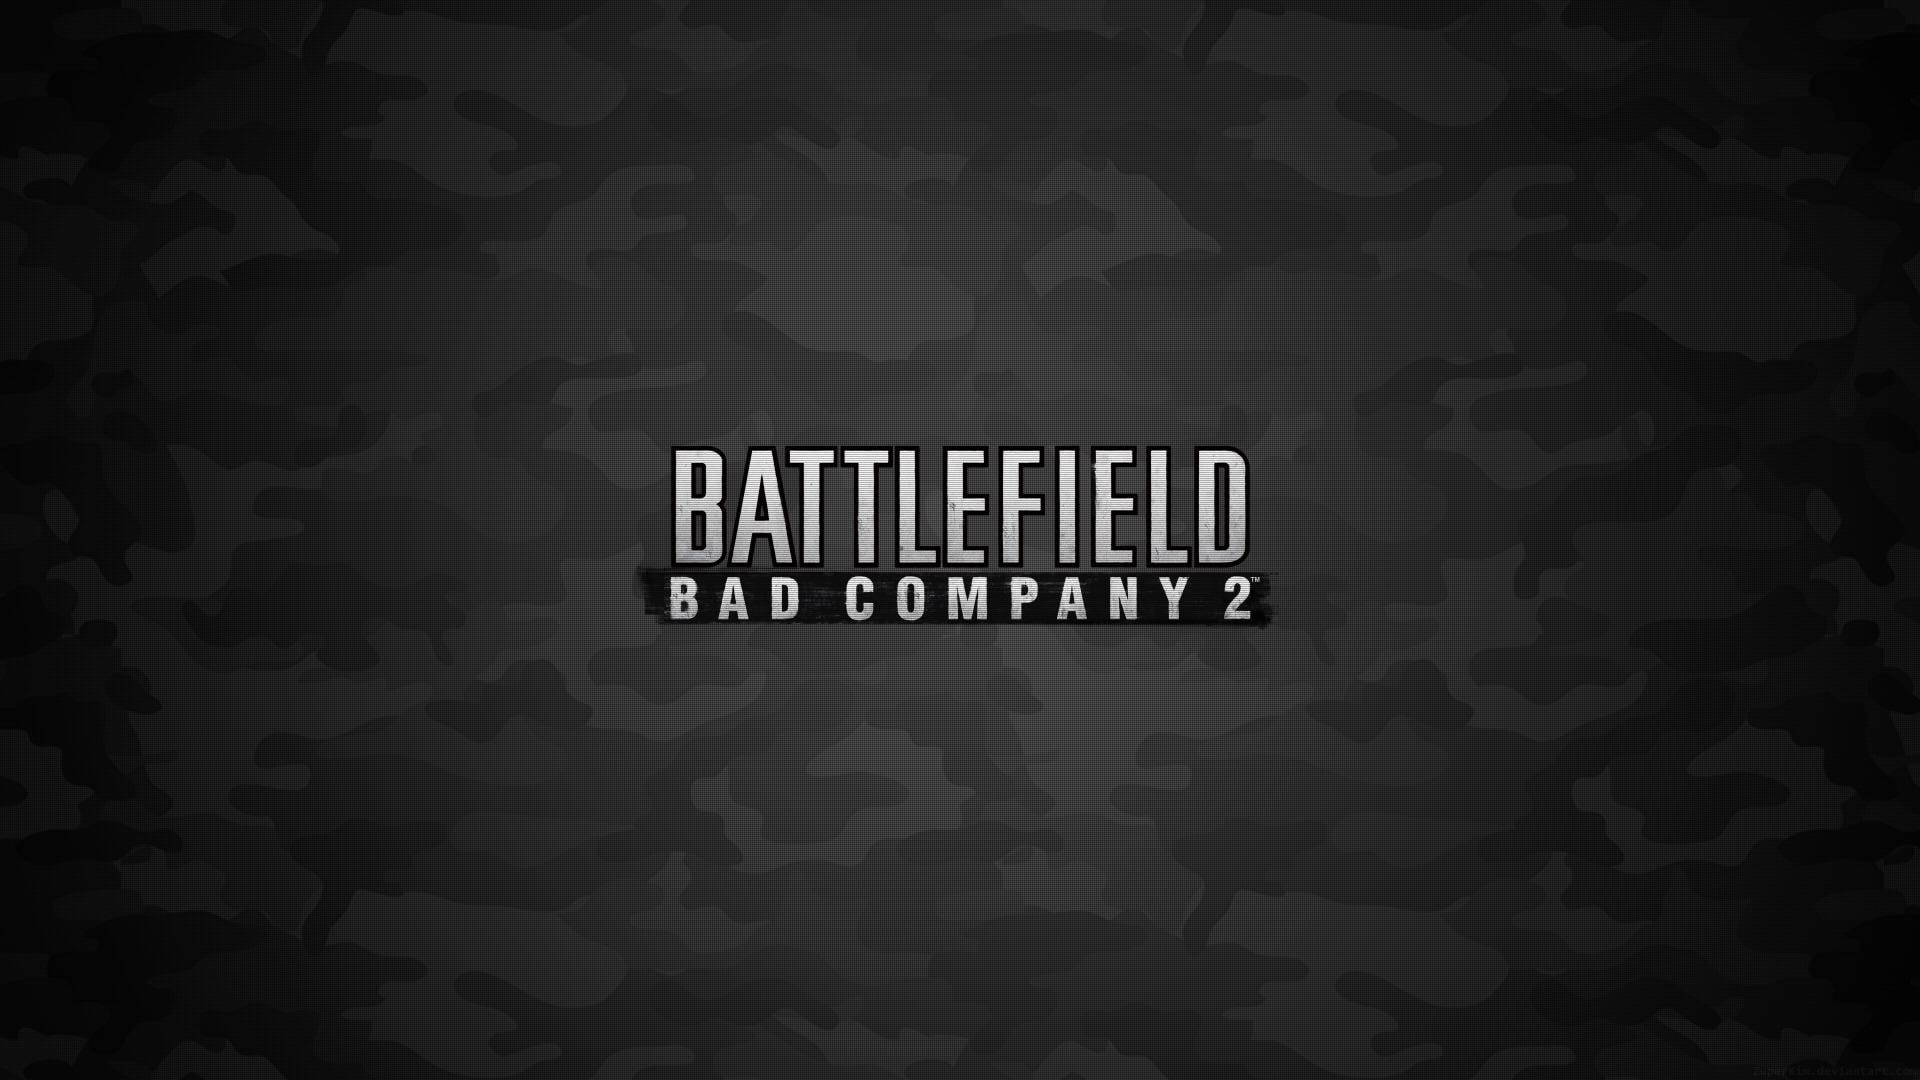 Battlefield - Bad Company 2, battlefield bad company 2, games